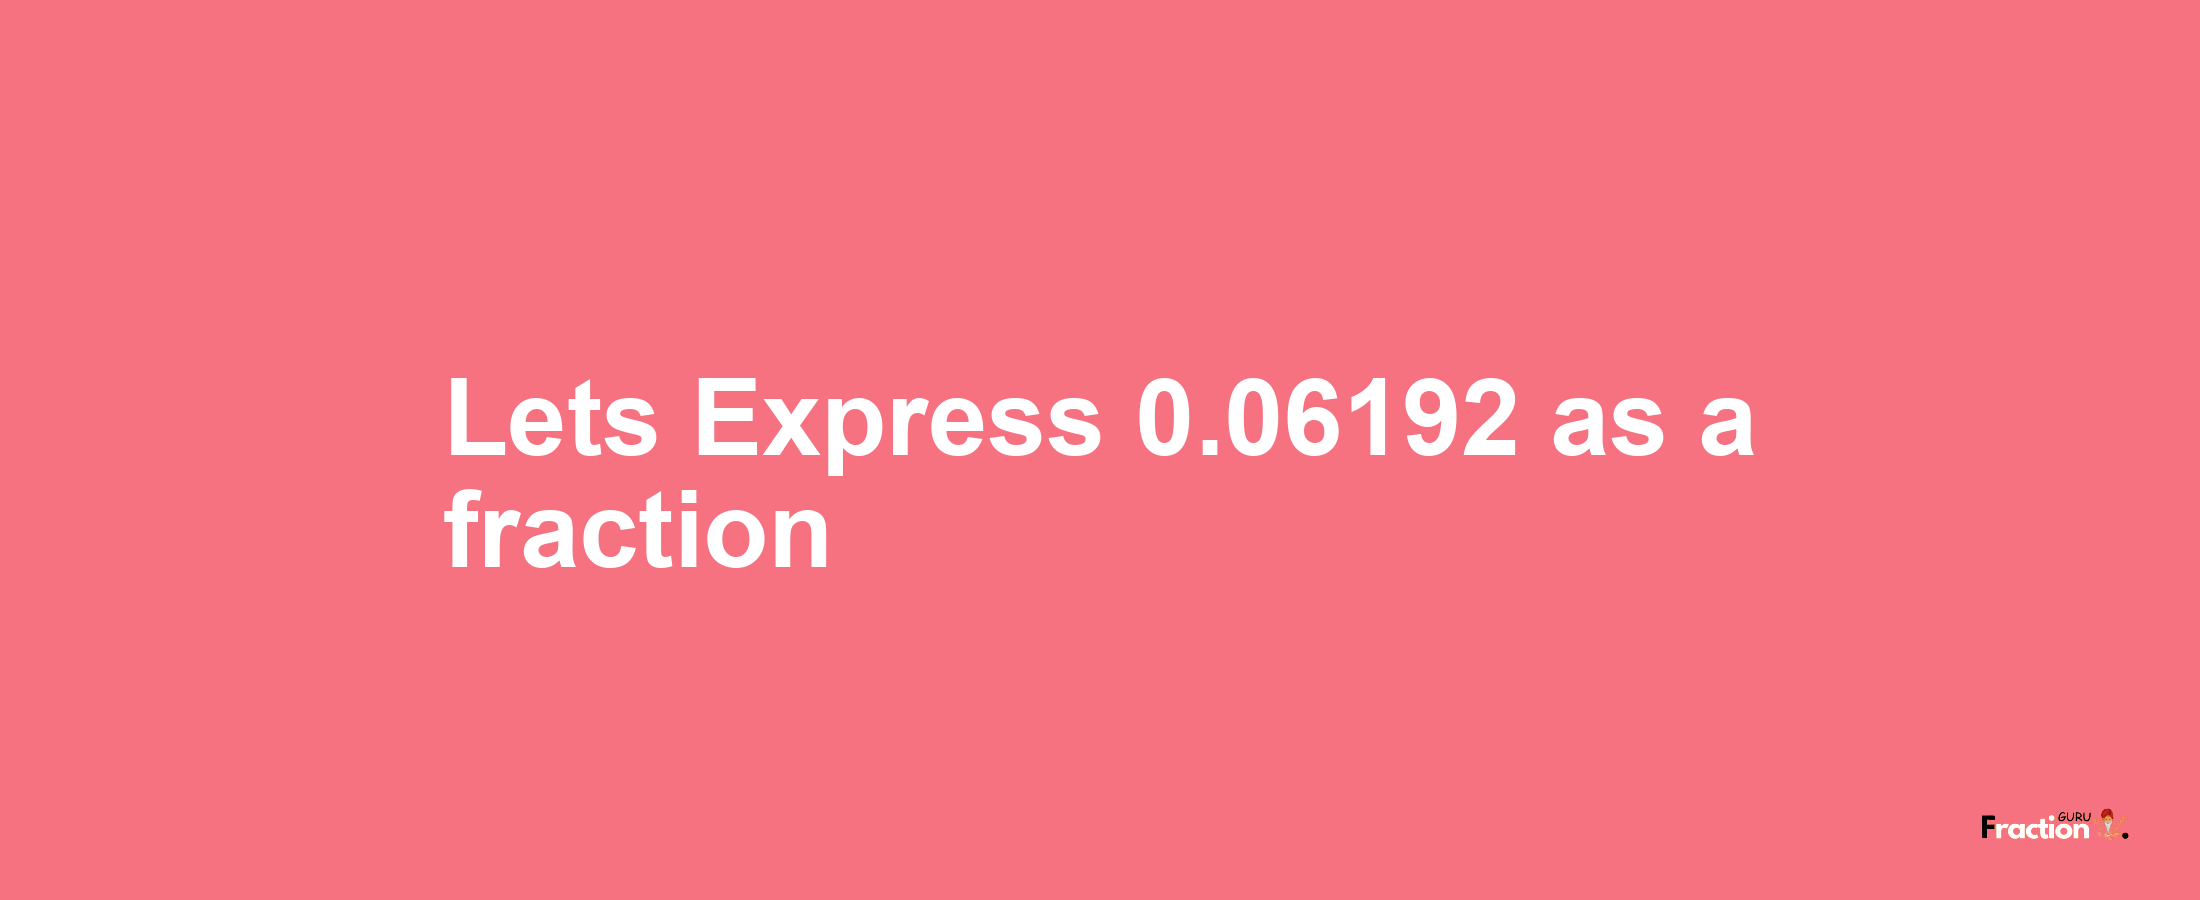 Lets Express 0.06192 as afraction